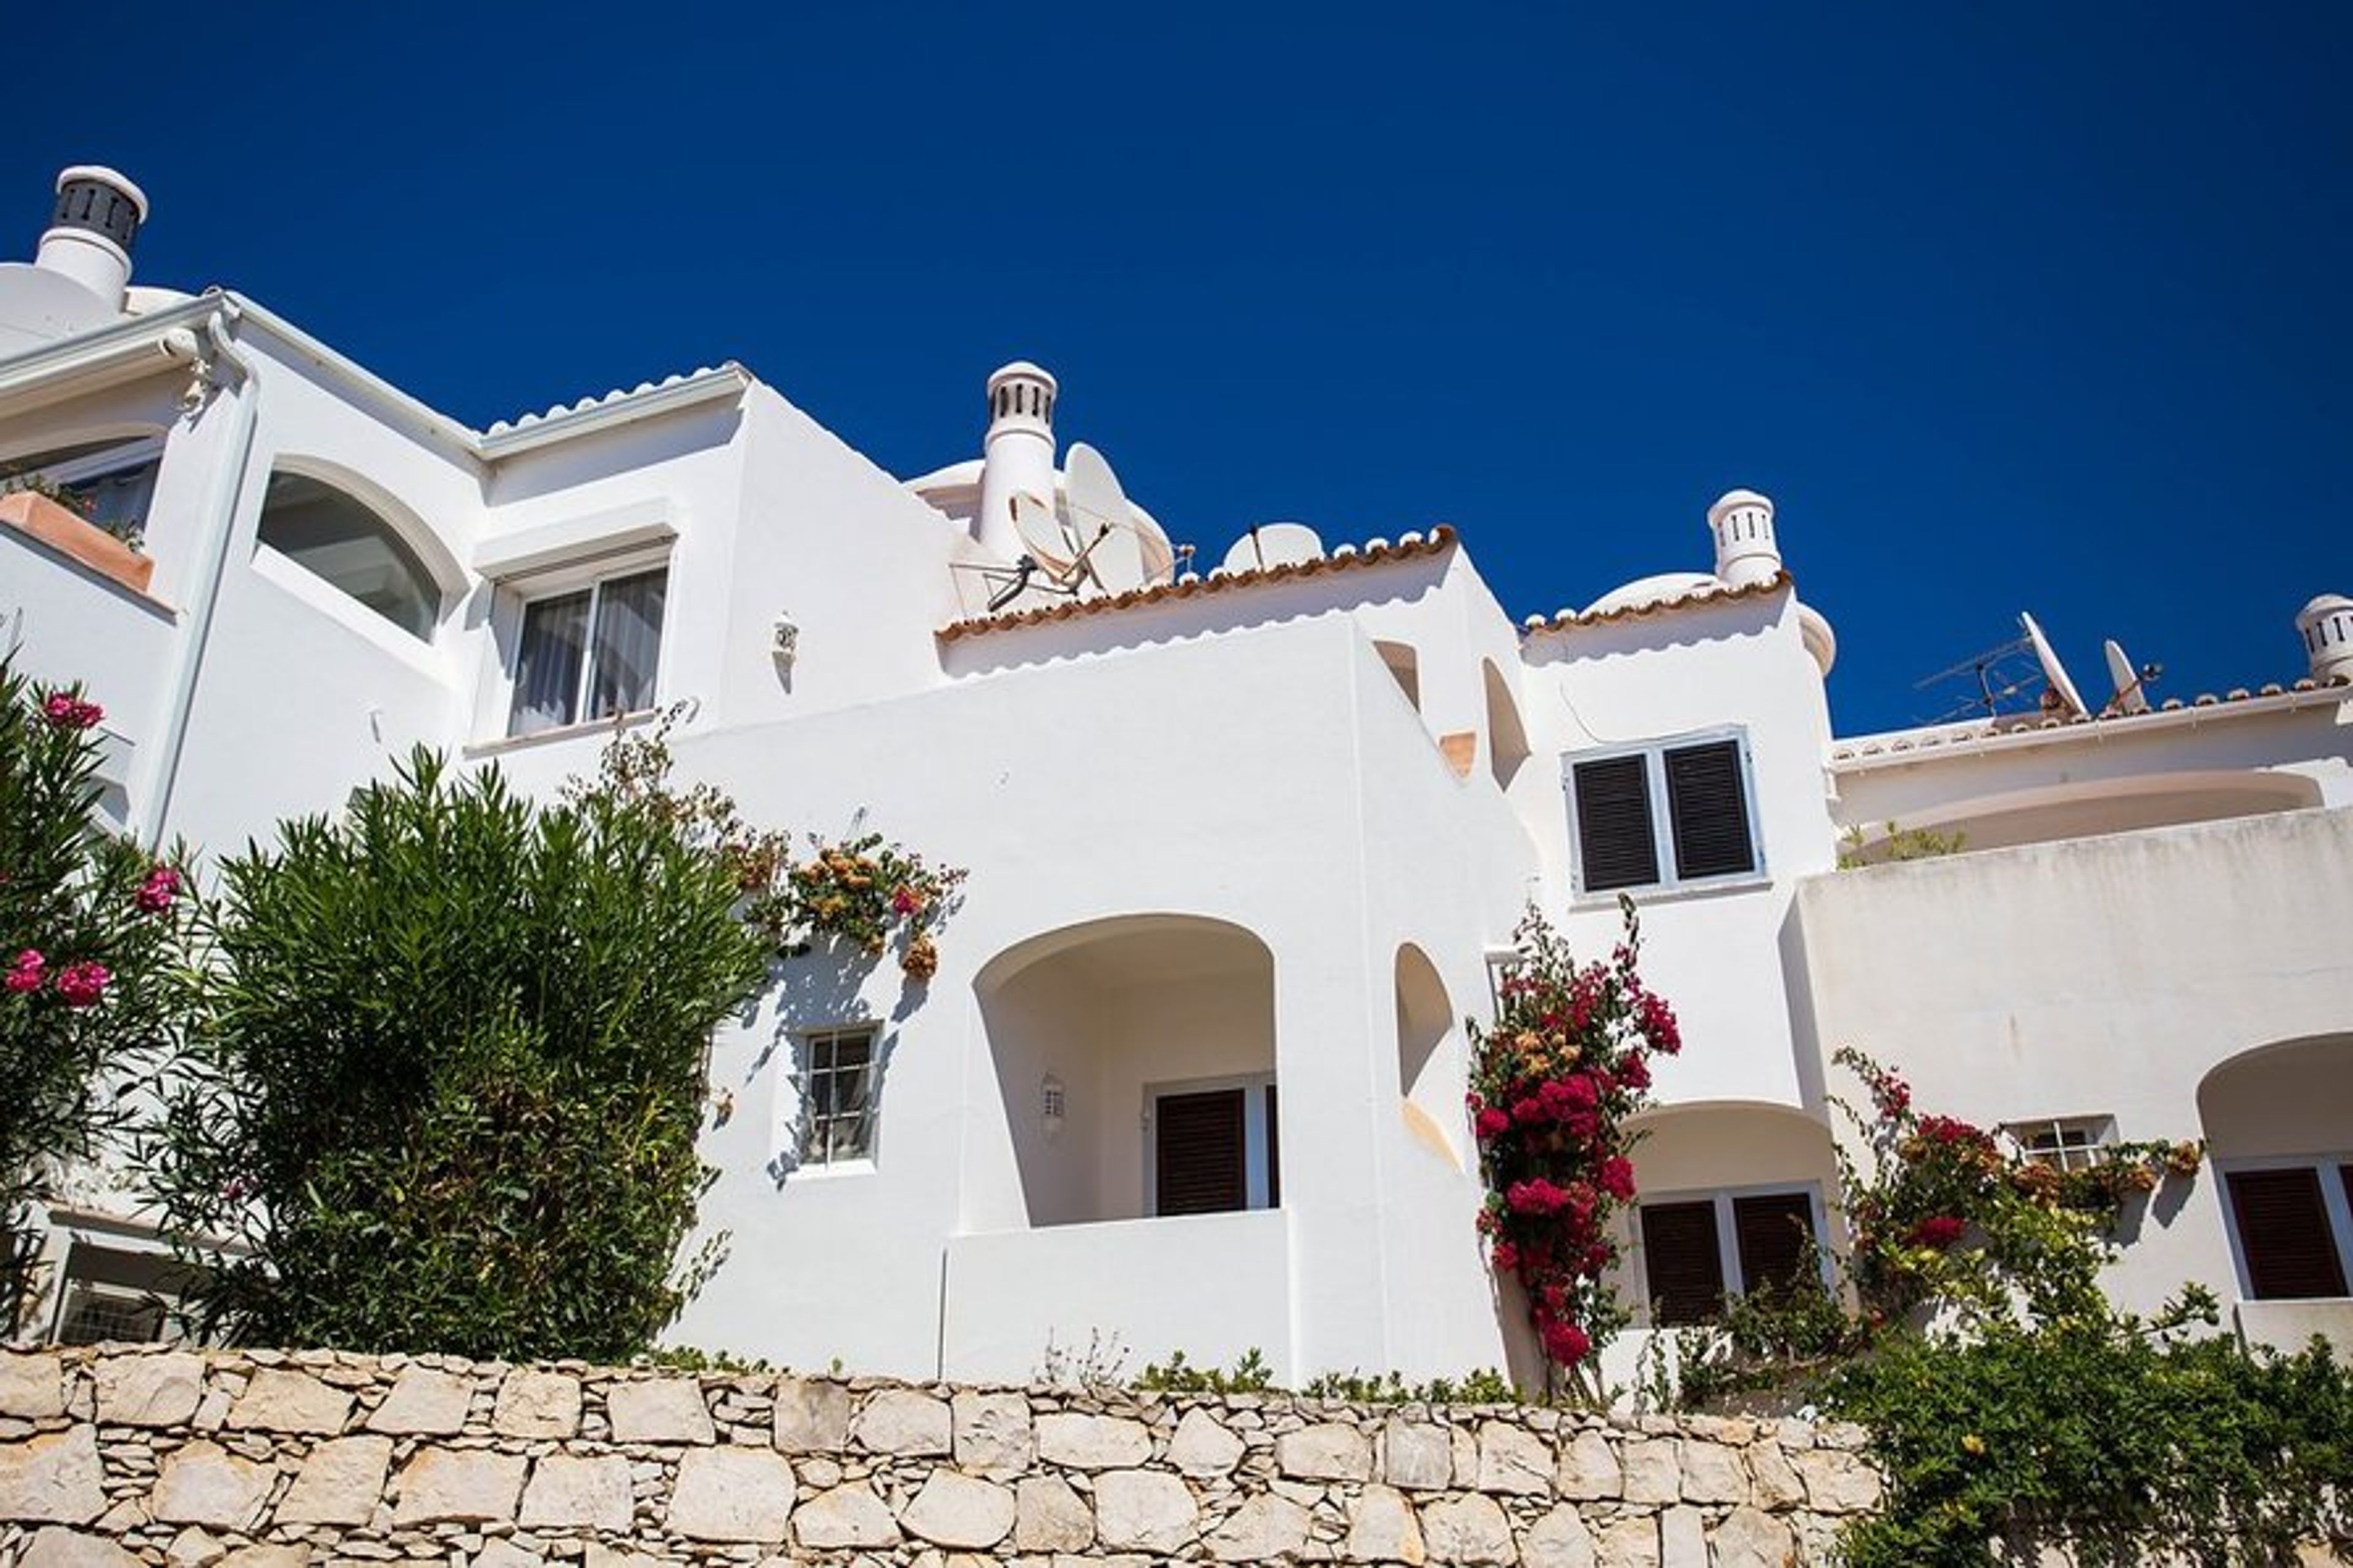 Colina Branca Townhouses situated just 5 mins walk to Carvoeiro